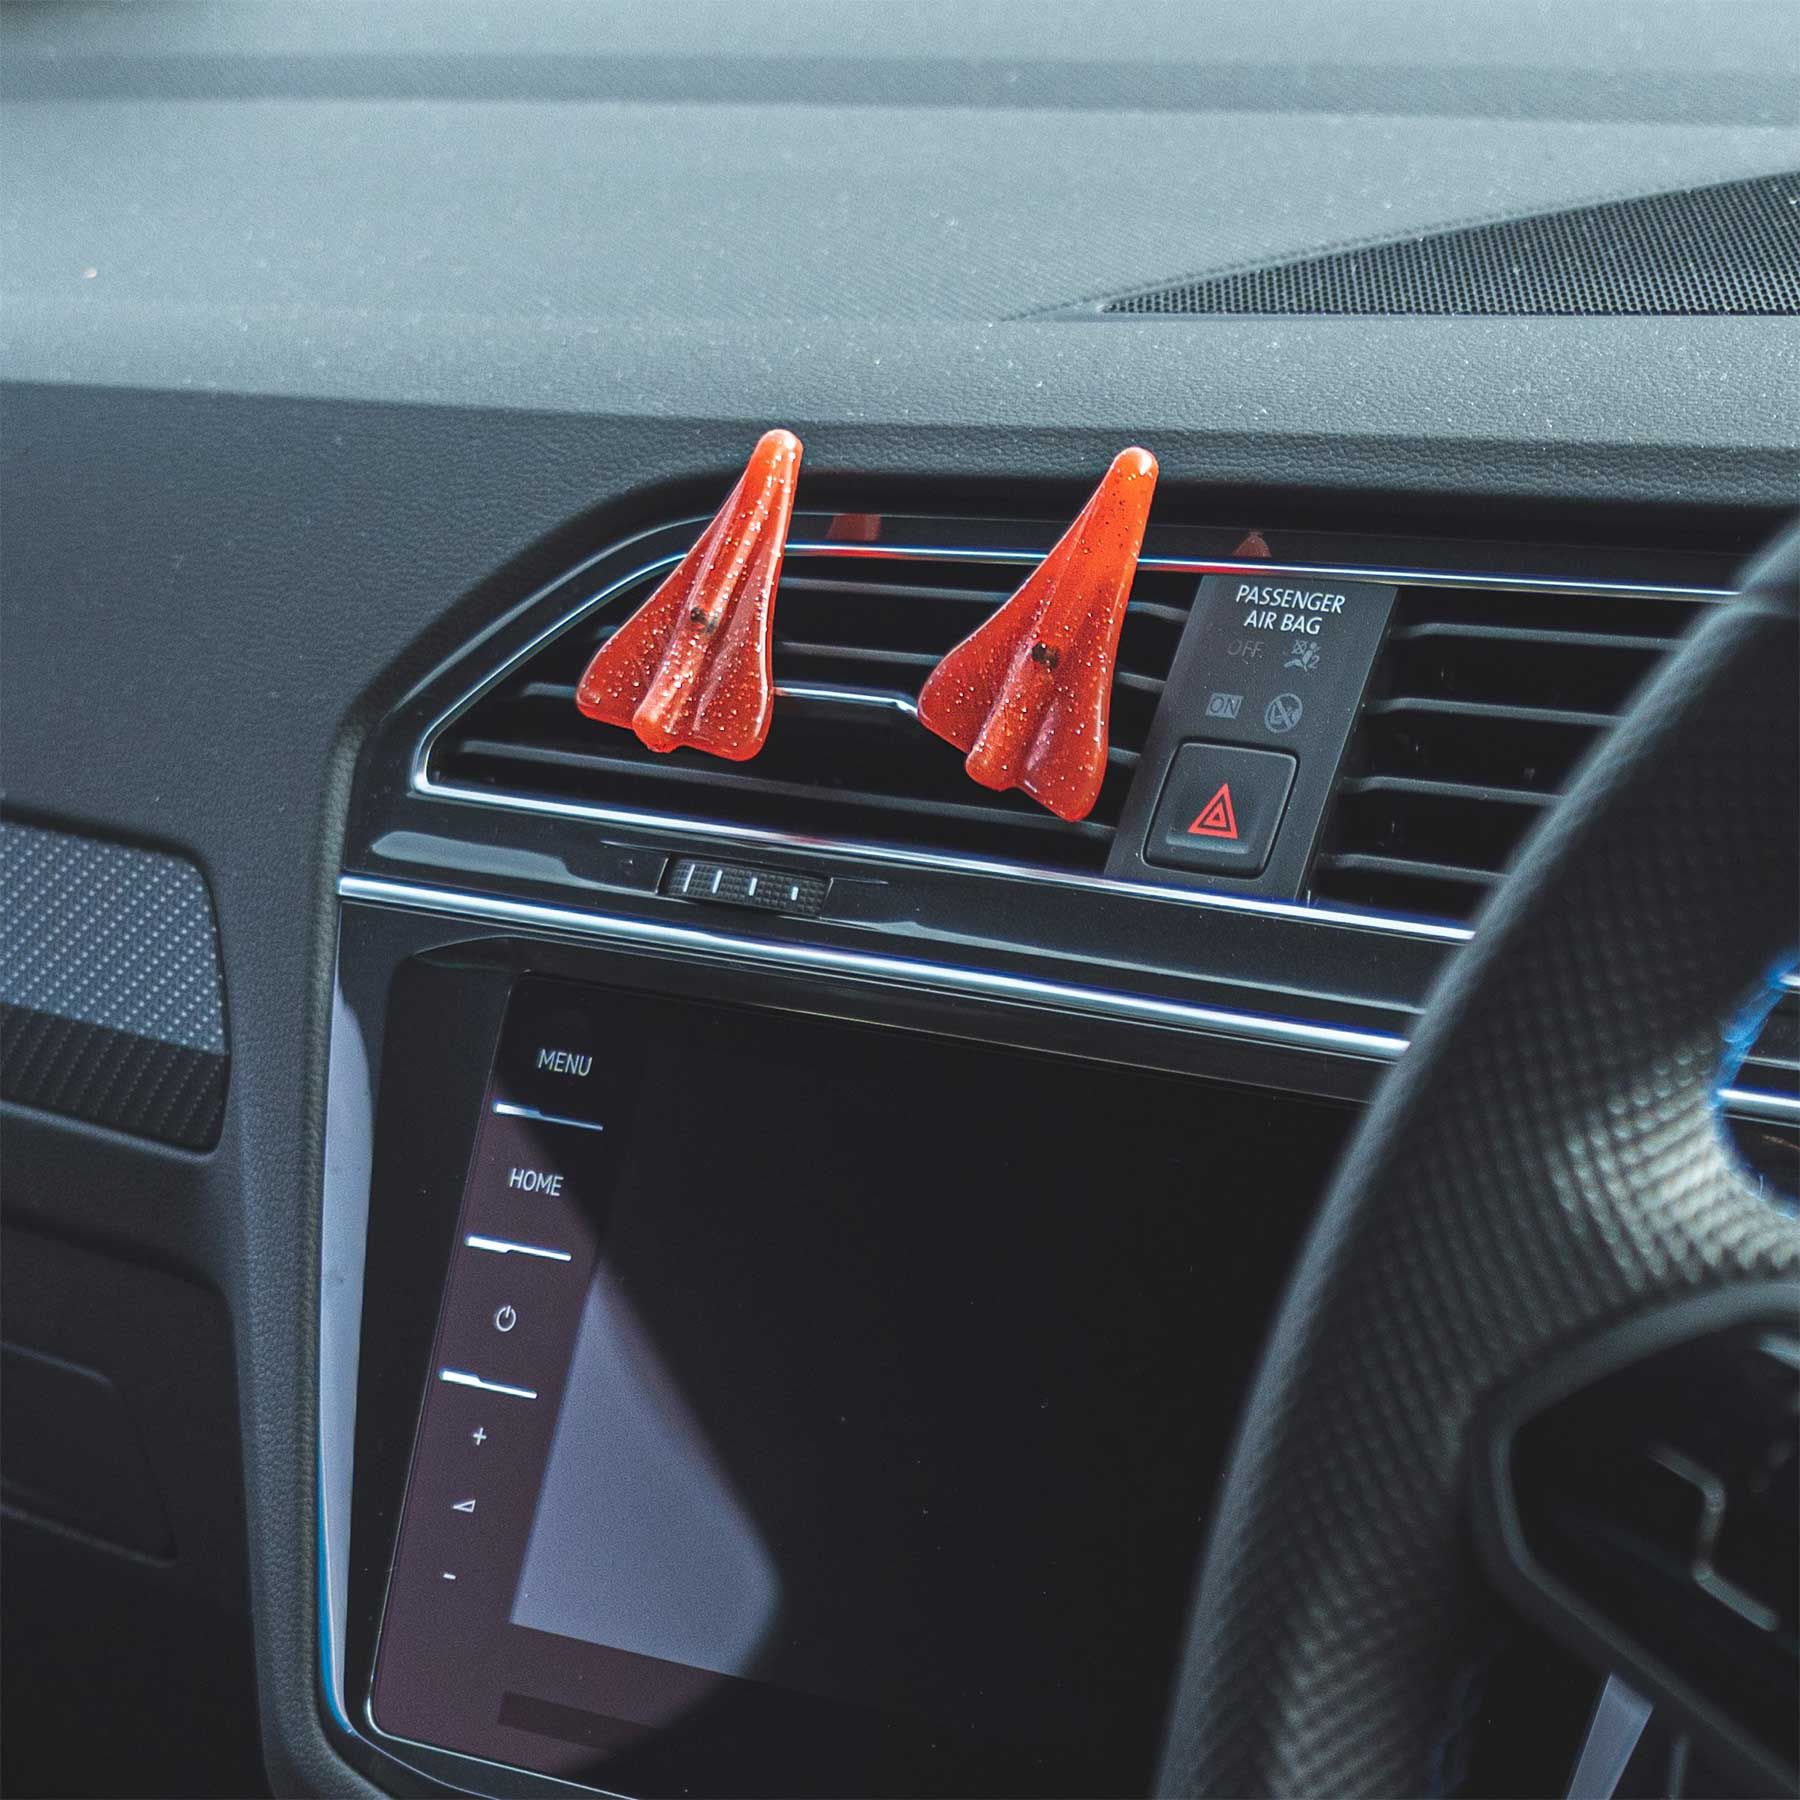 Pair of Jelly Jets Sparkle Air Fresheners clipped to car air vent.